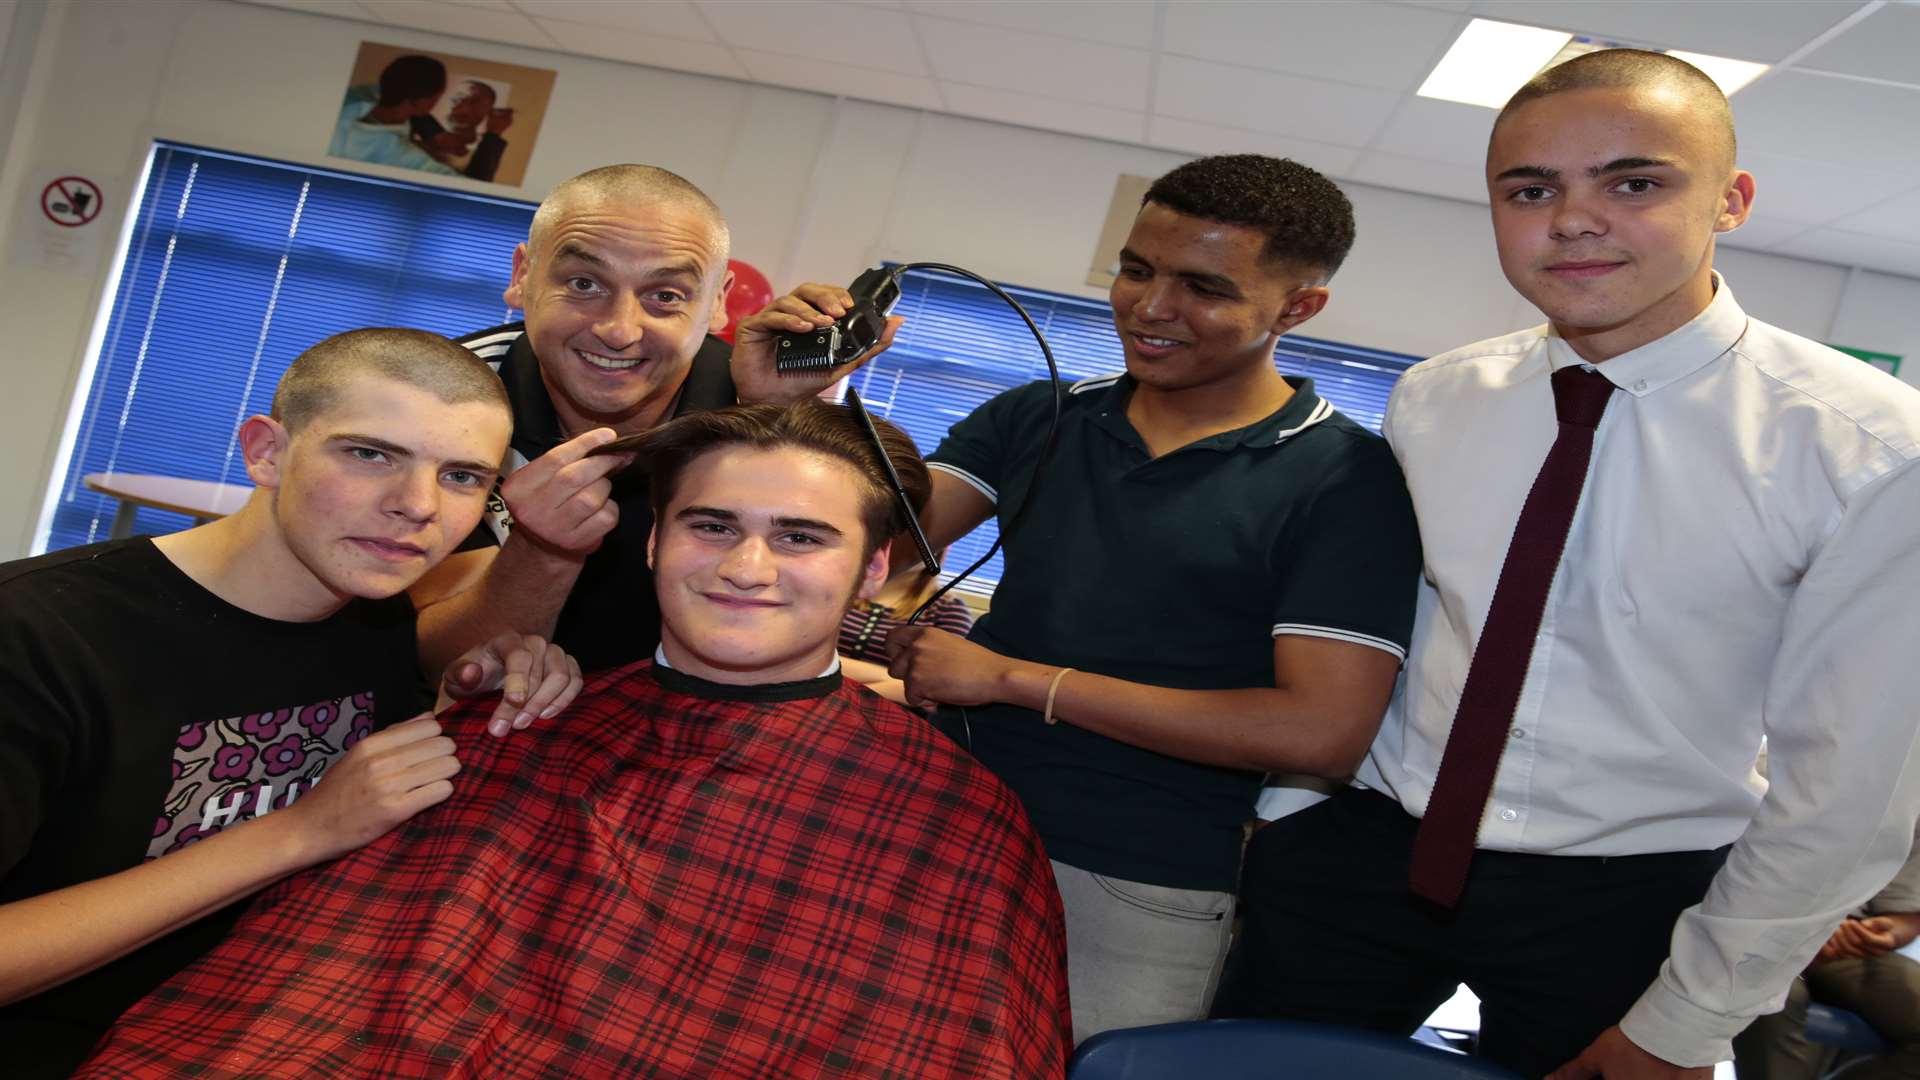 George is the last to be shaved. Picture: Martin Apps